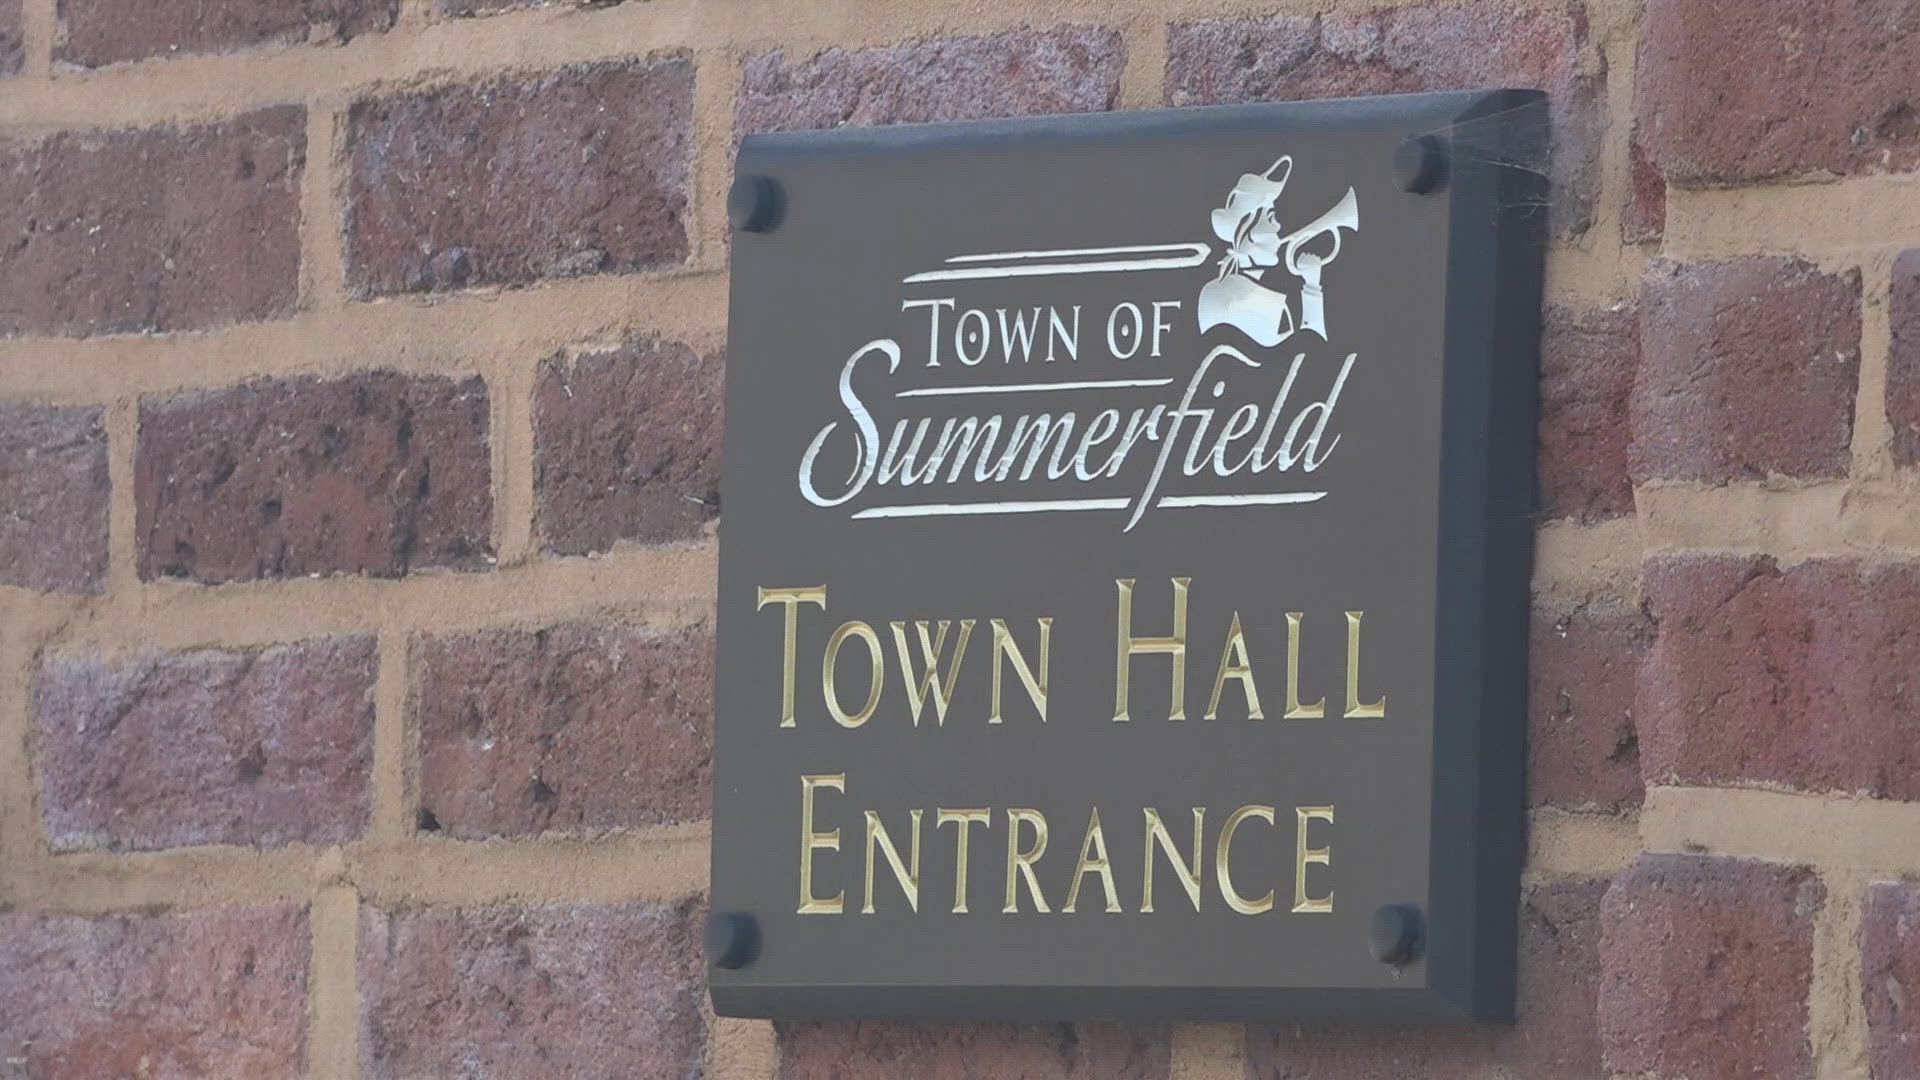 The town took another step in tackling its staffing problem.